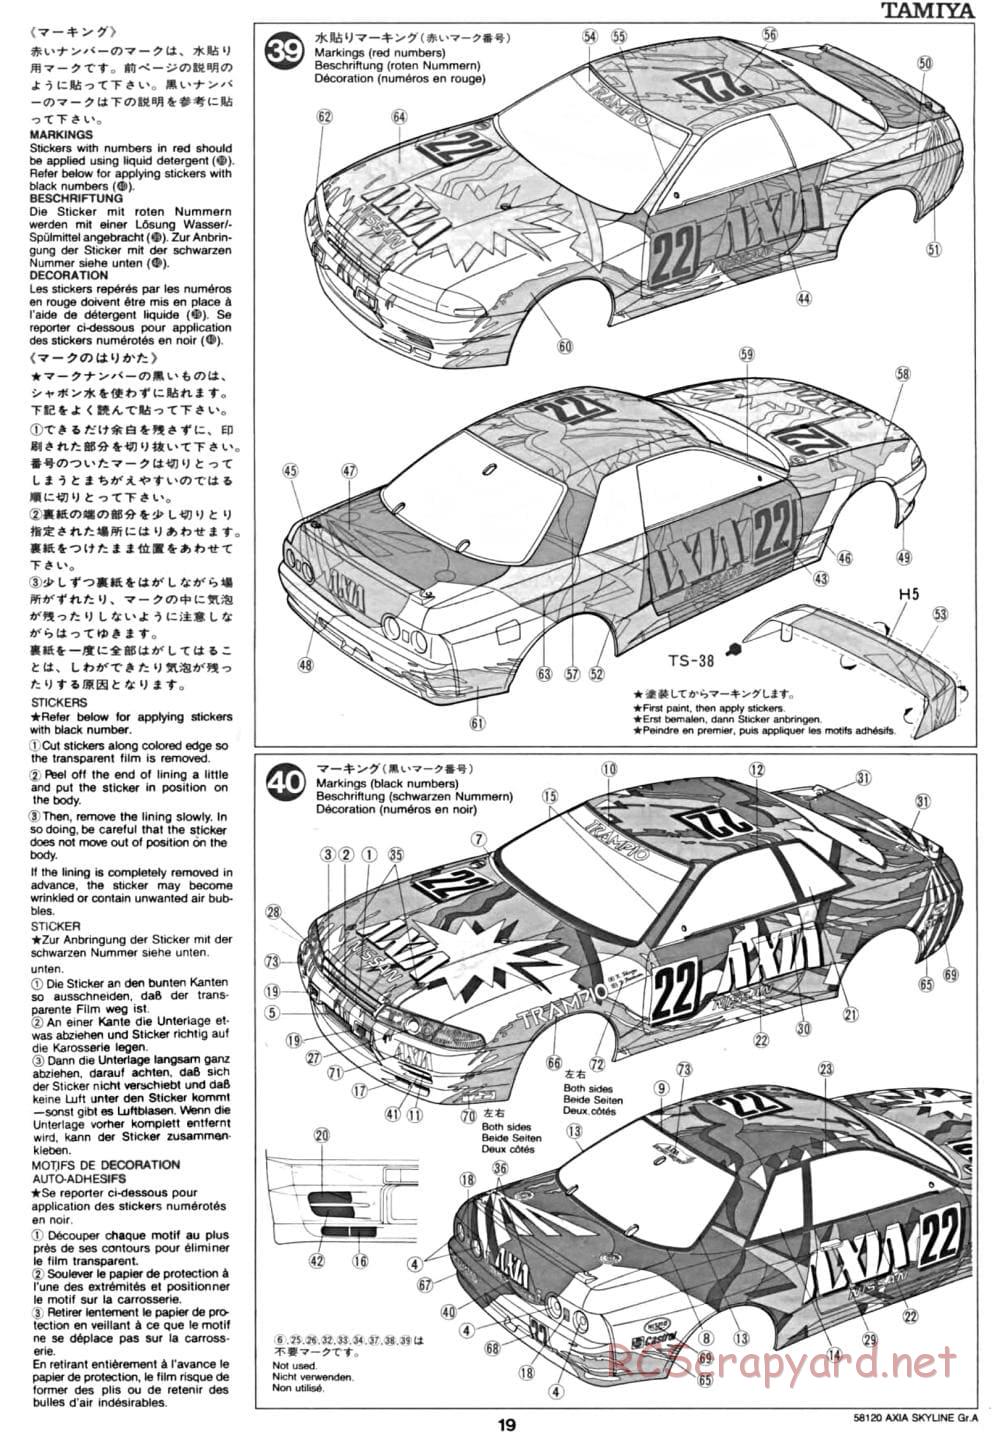 Tamiya - Axia Skyline GT-R Gr.A - TA-01 Chassis - Manual - Page 20